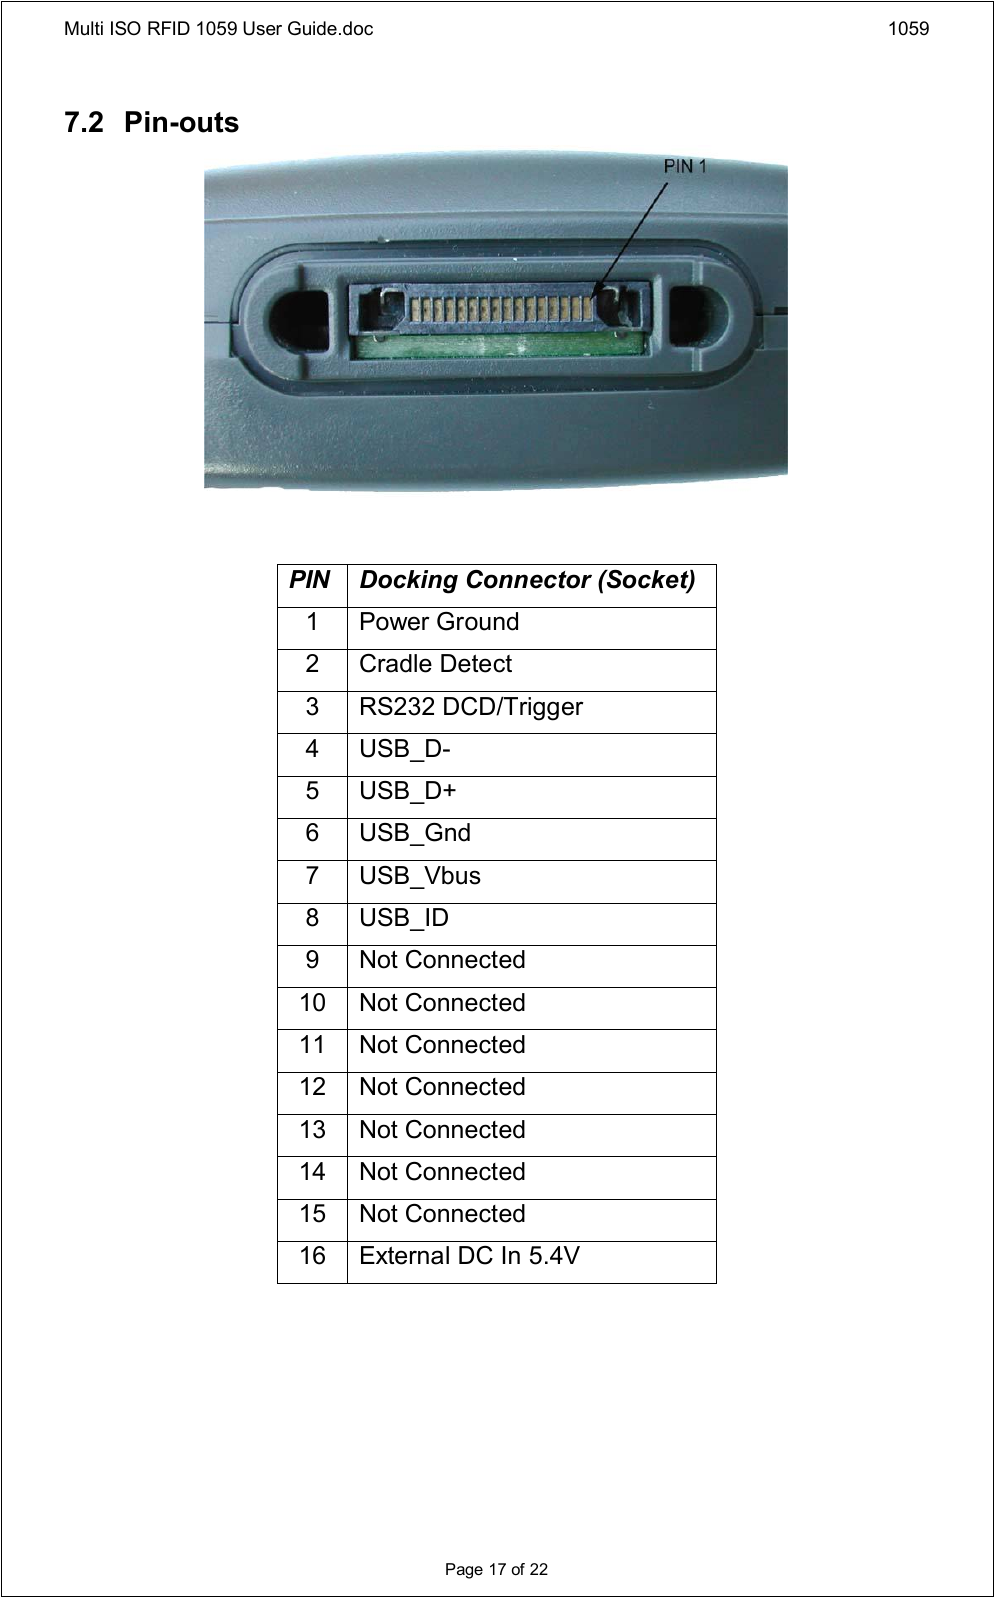 Multi ISO RFID 1059 User Guide.doc 1059Page 17 of 227.2 Pin-outsPIN Docking Connector (Socket)1 Power Ground2 Cradle Detect3 RS232 DCD/Trigger4 USB_D-5 USB_D+6 USB_Gnd7 USB_Vbus8 USB_ID9 Not Connected10 Not Connected11 Not Connected12 Not Connected13 Not Connected14 Not Connected15 Not Connected16 External DC In 5.4V